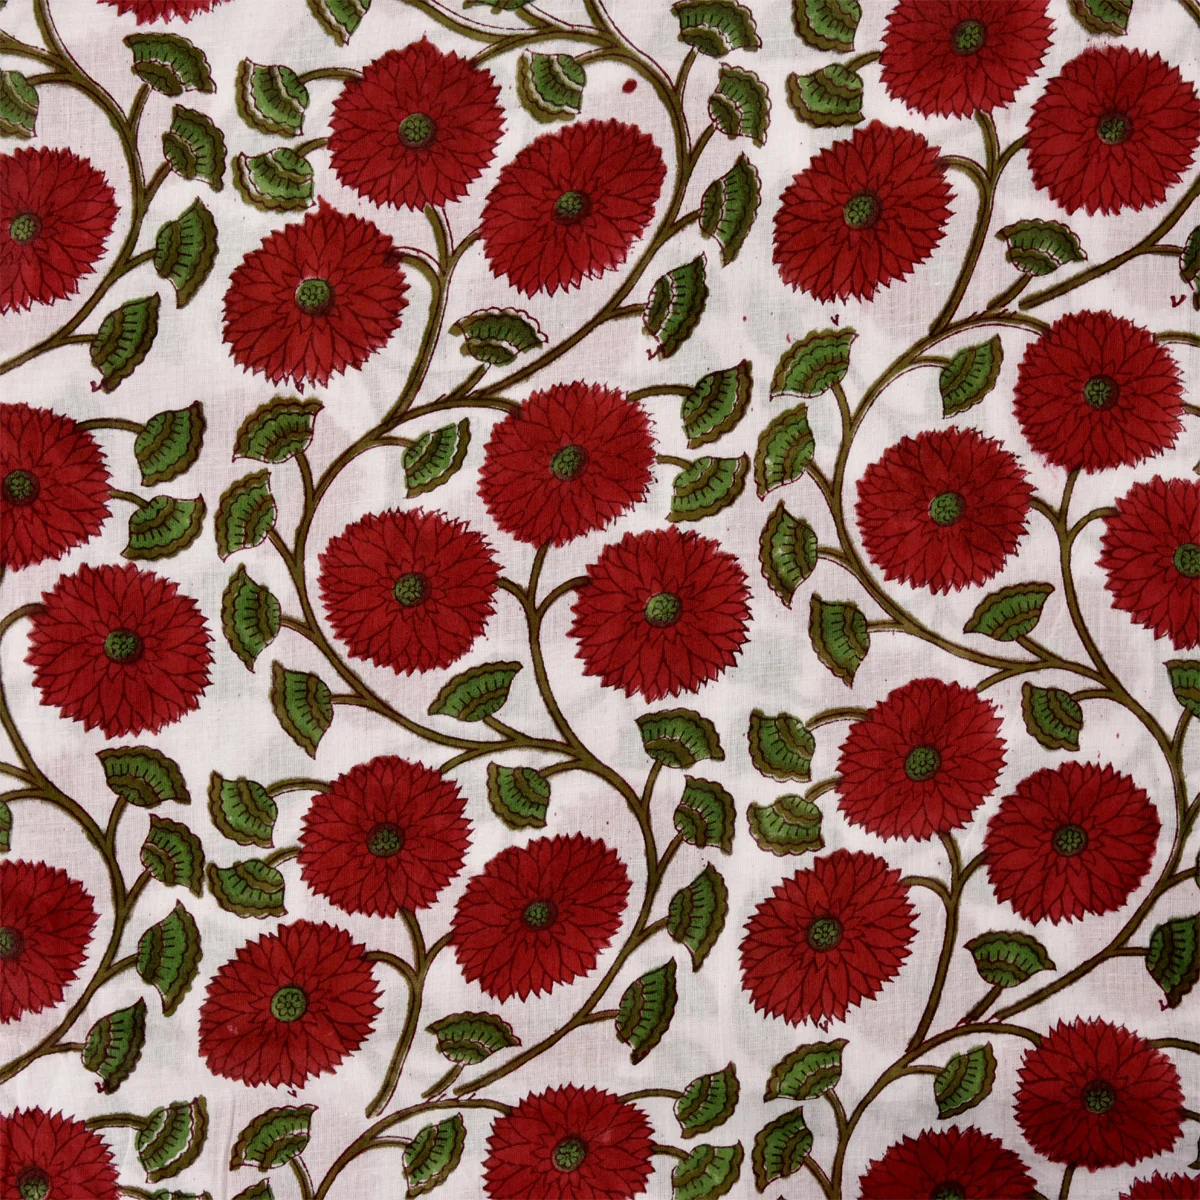 Hand painted Indian cotton fabric